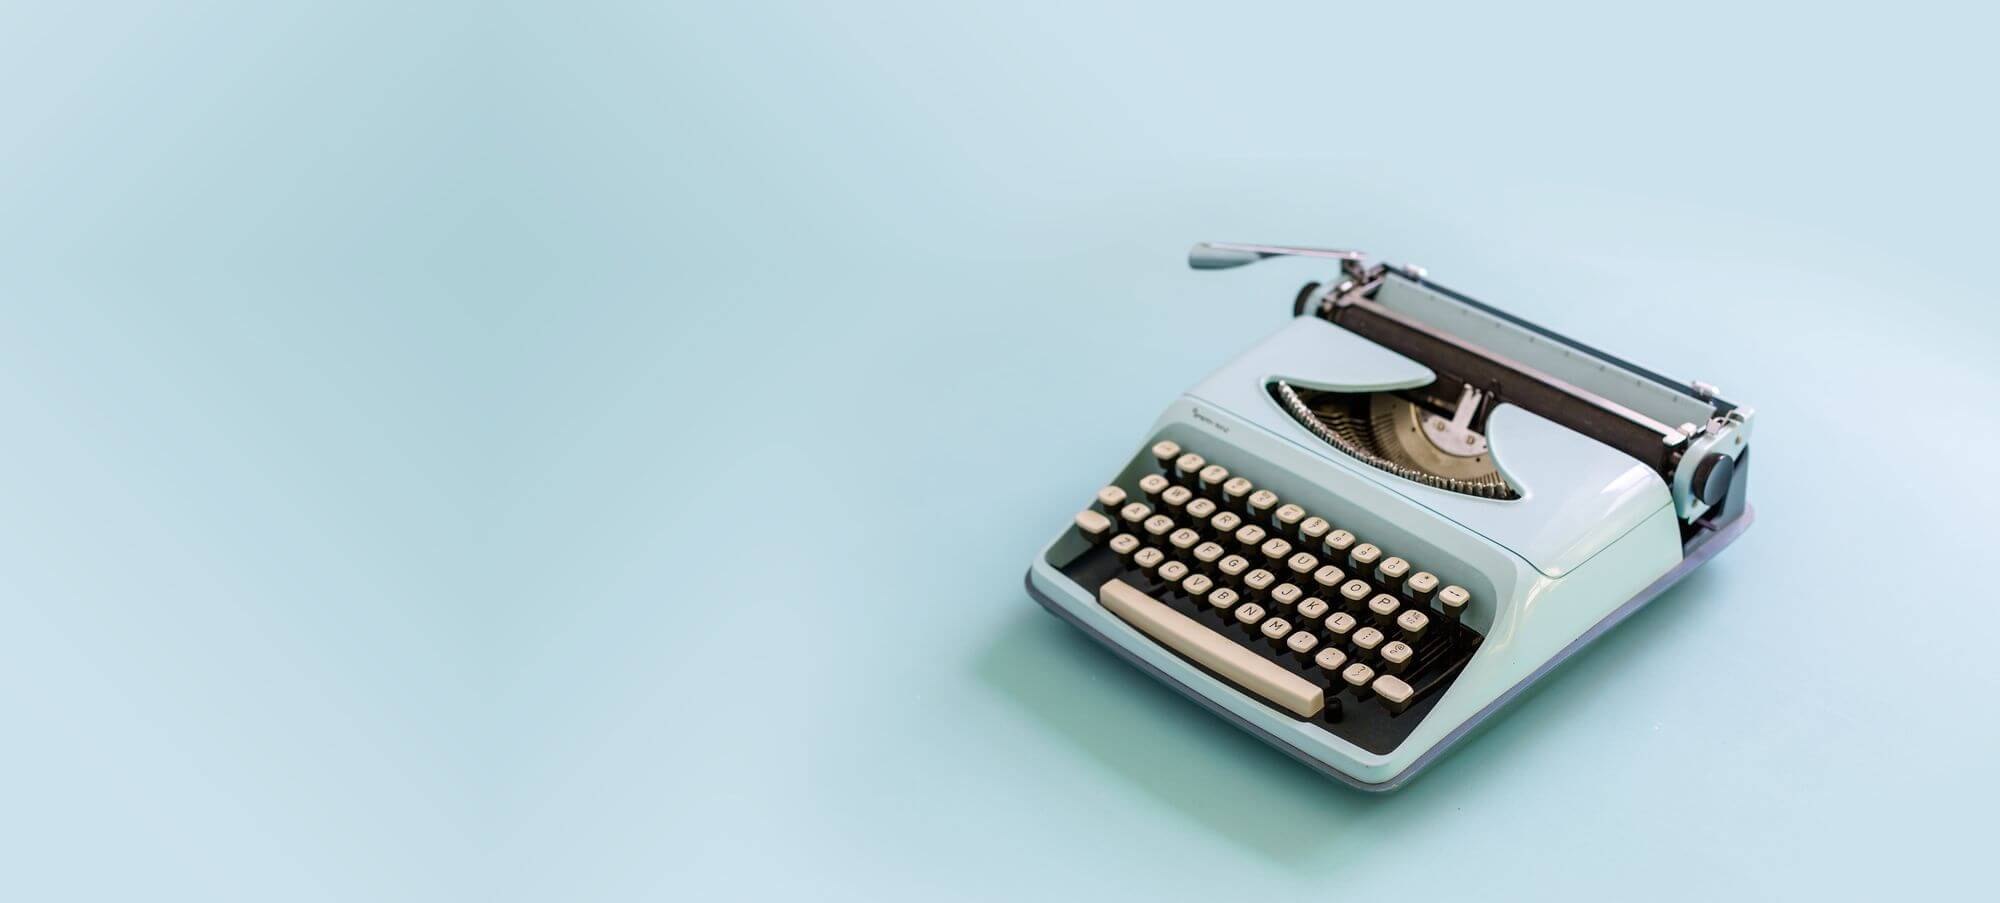 A blue typewriter against a blue background